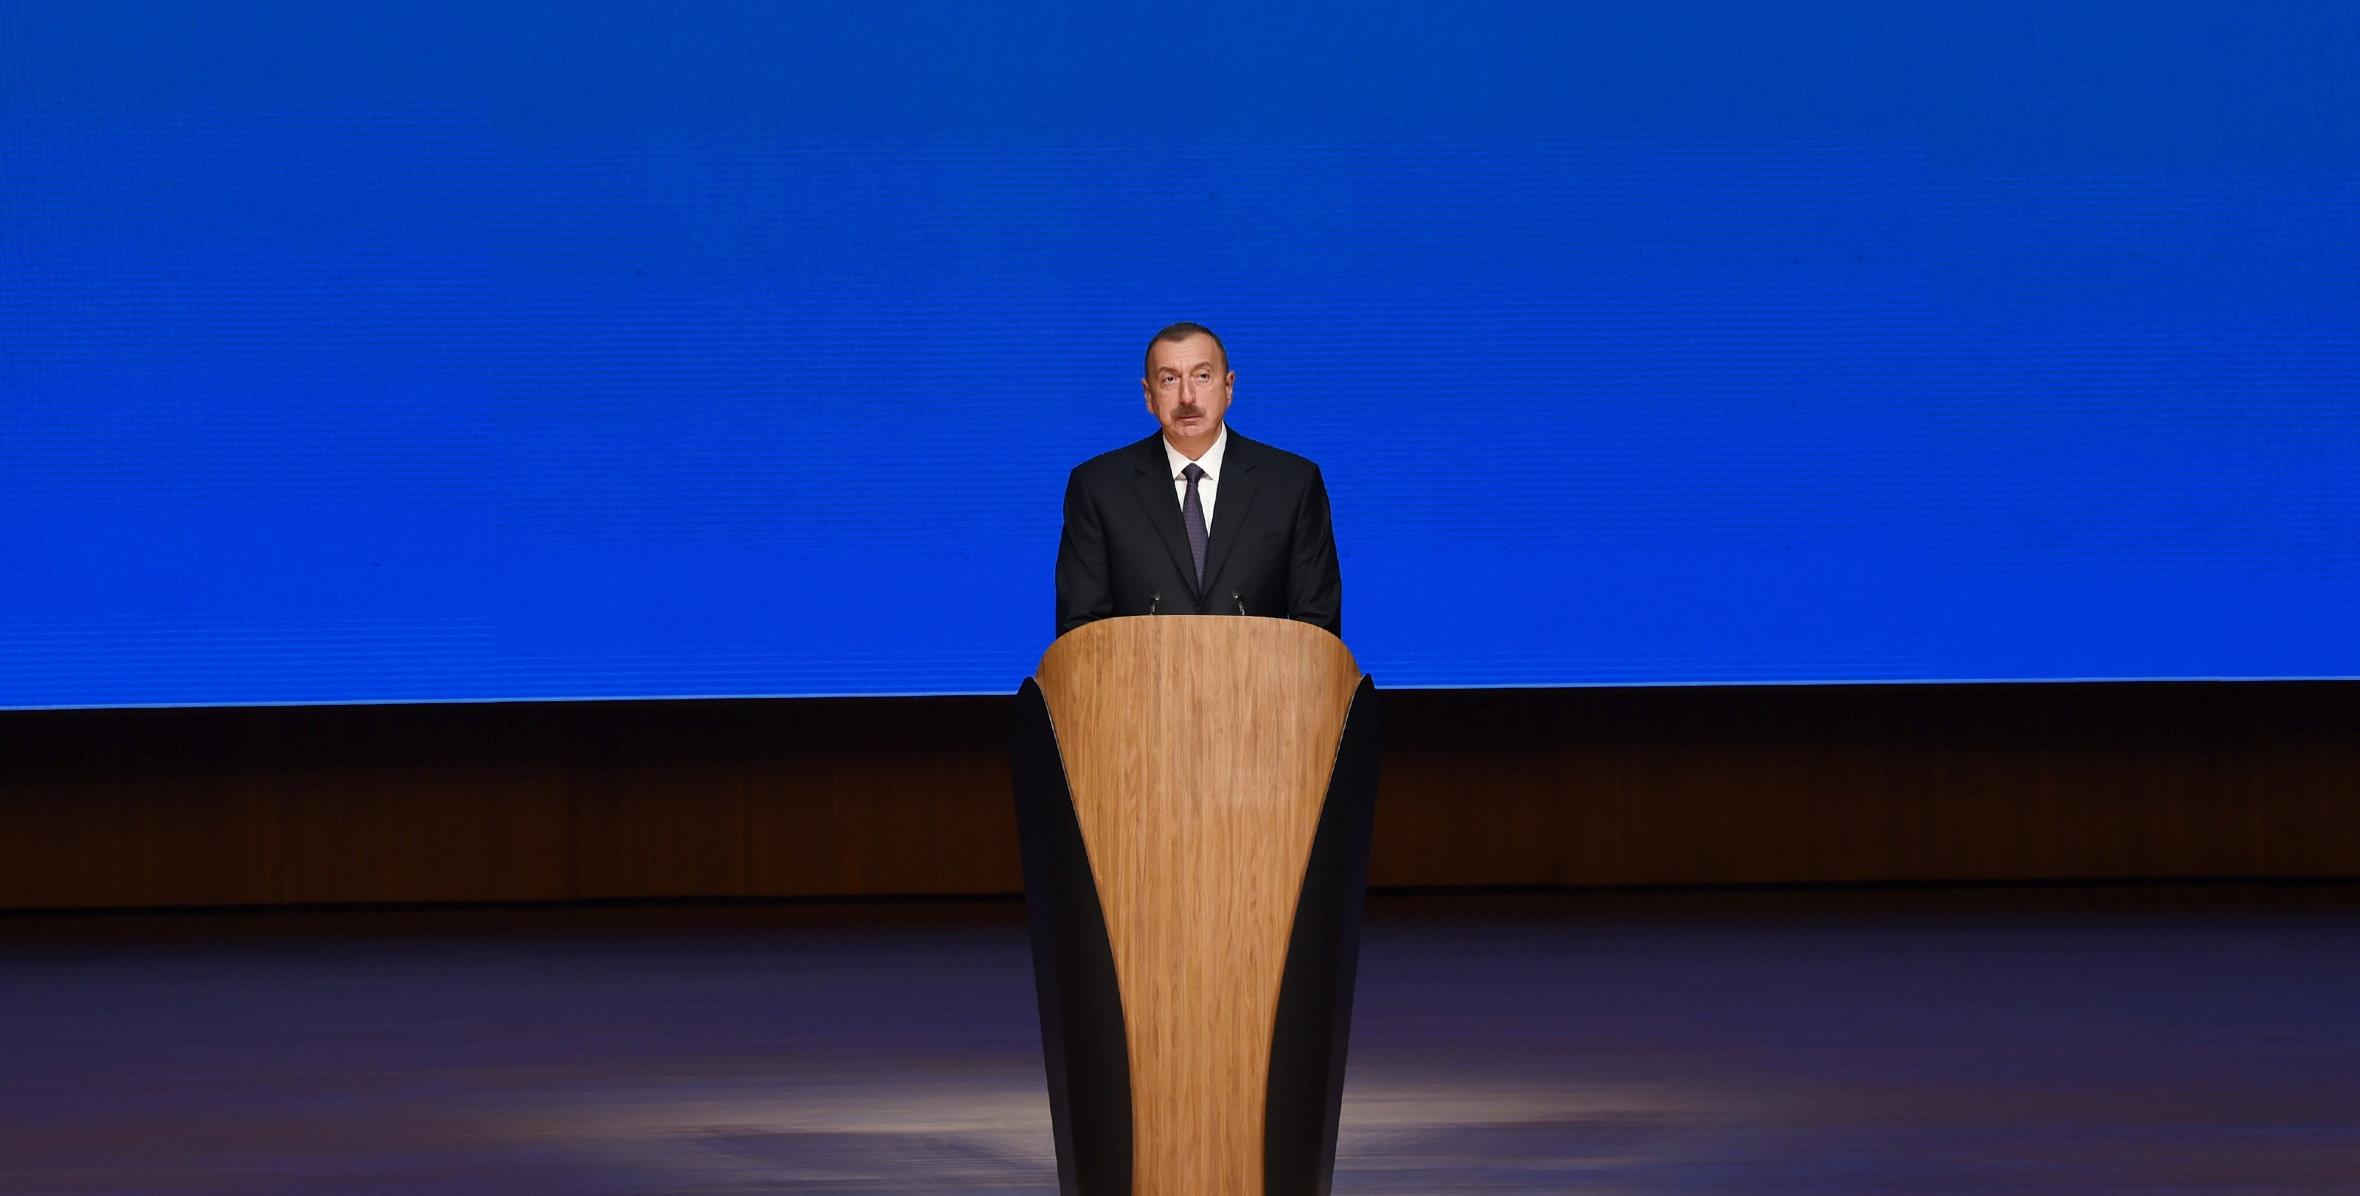 Ilham Aliyev attends solemn ceremony celebrating two billion tons of oil production in Azerbaijan